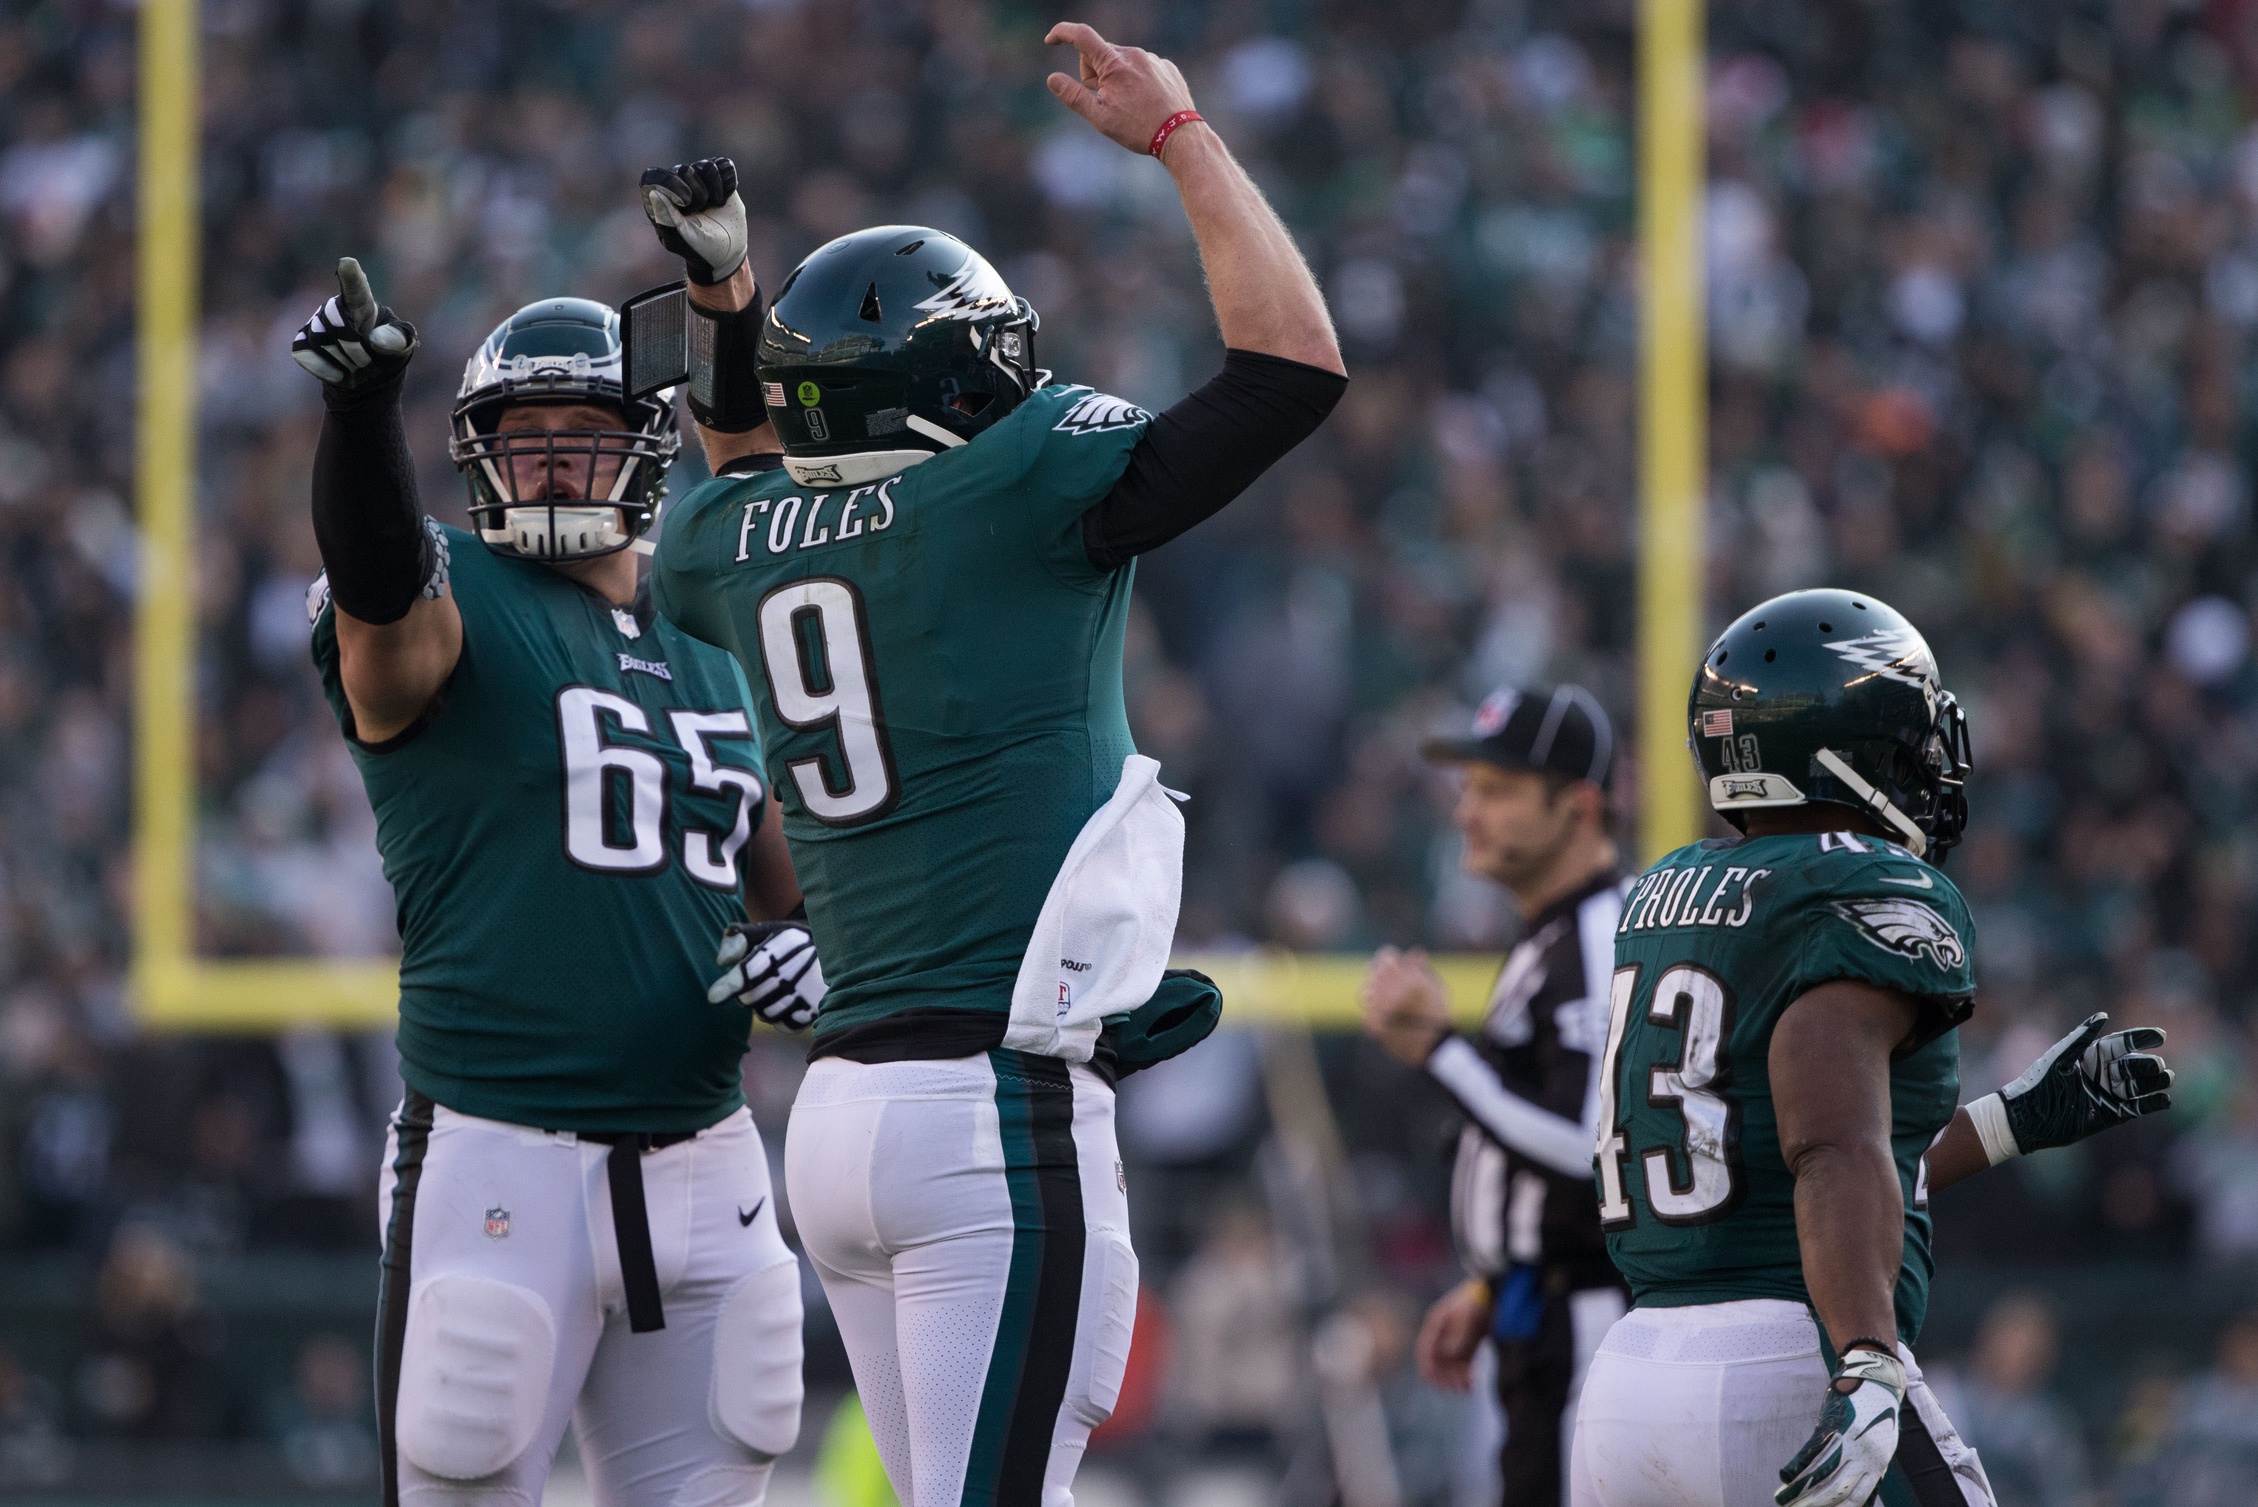 Of Course Nick Foles Was Named NFC Offensive Player of the Week